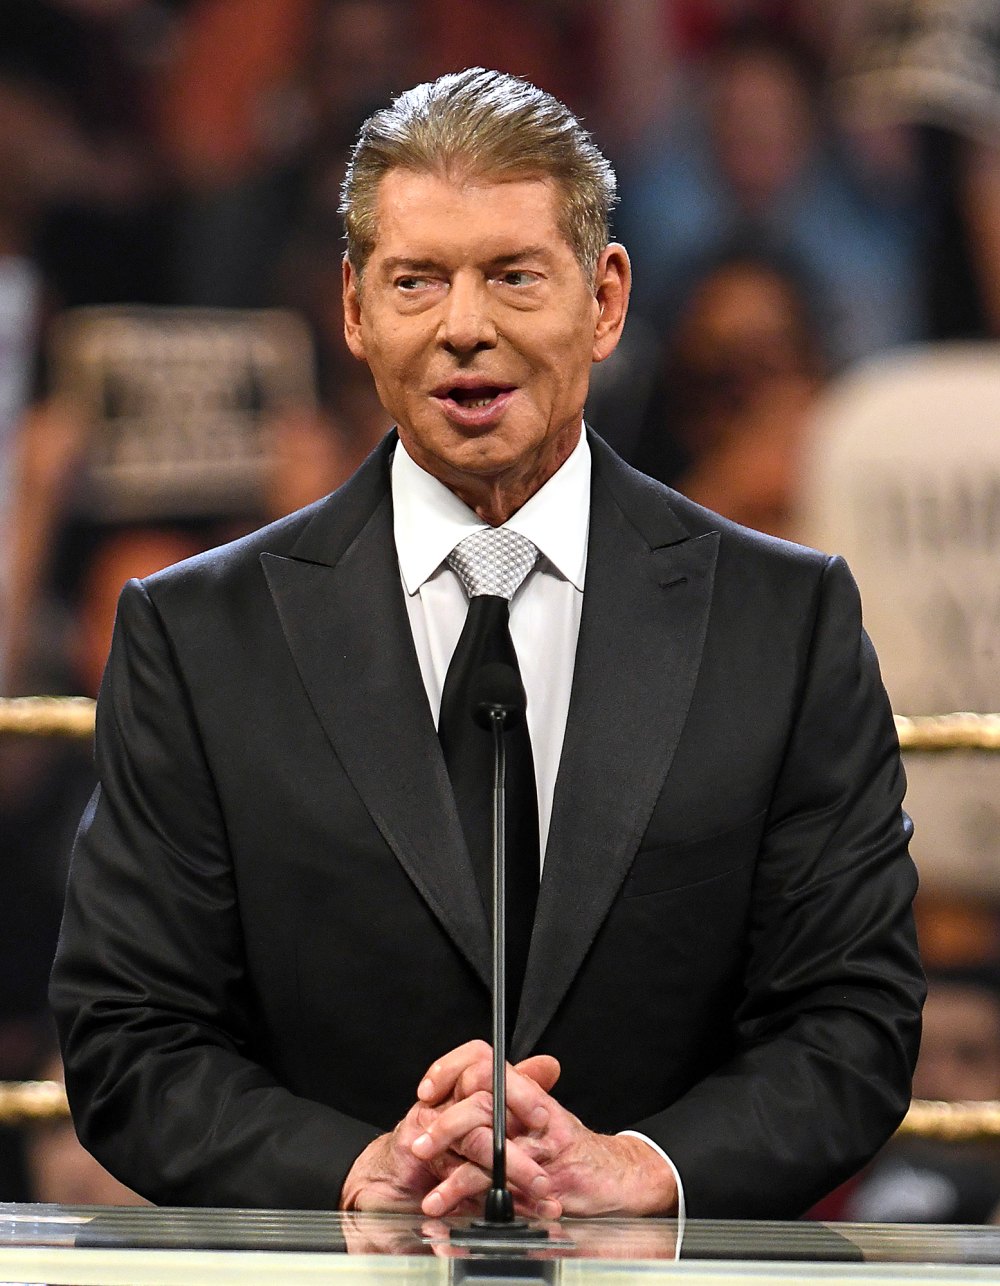 WWE Boss Vince McMahon Accused of Sexual Misconduct: Breaking Down the Scandal and Fallout